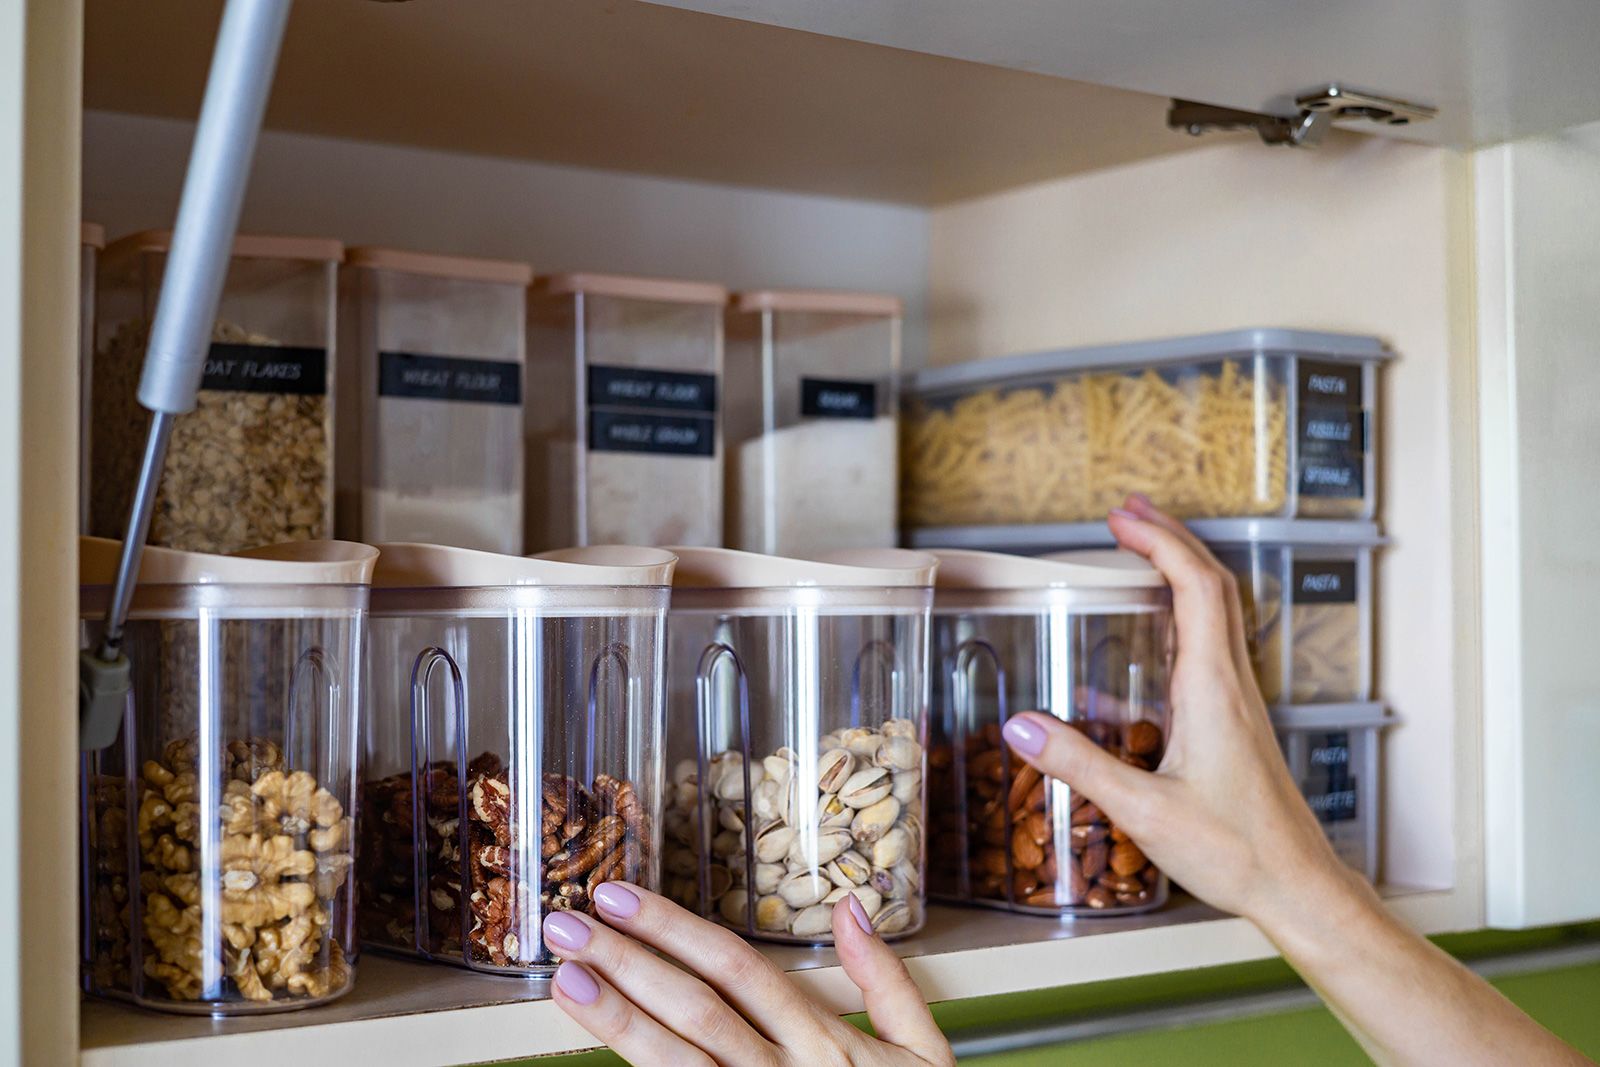 Spring-clean your pantry and store food in a smart way